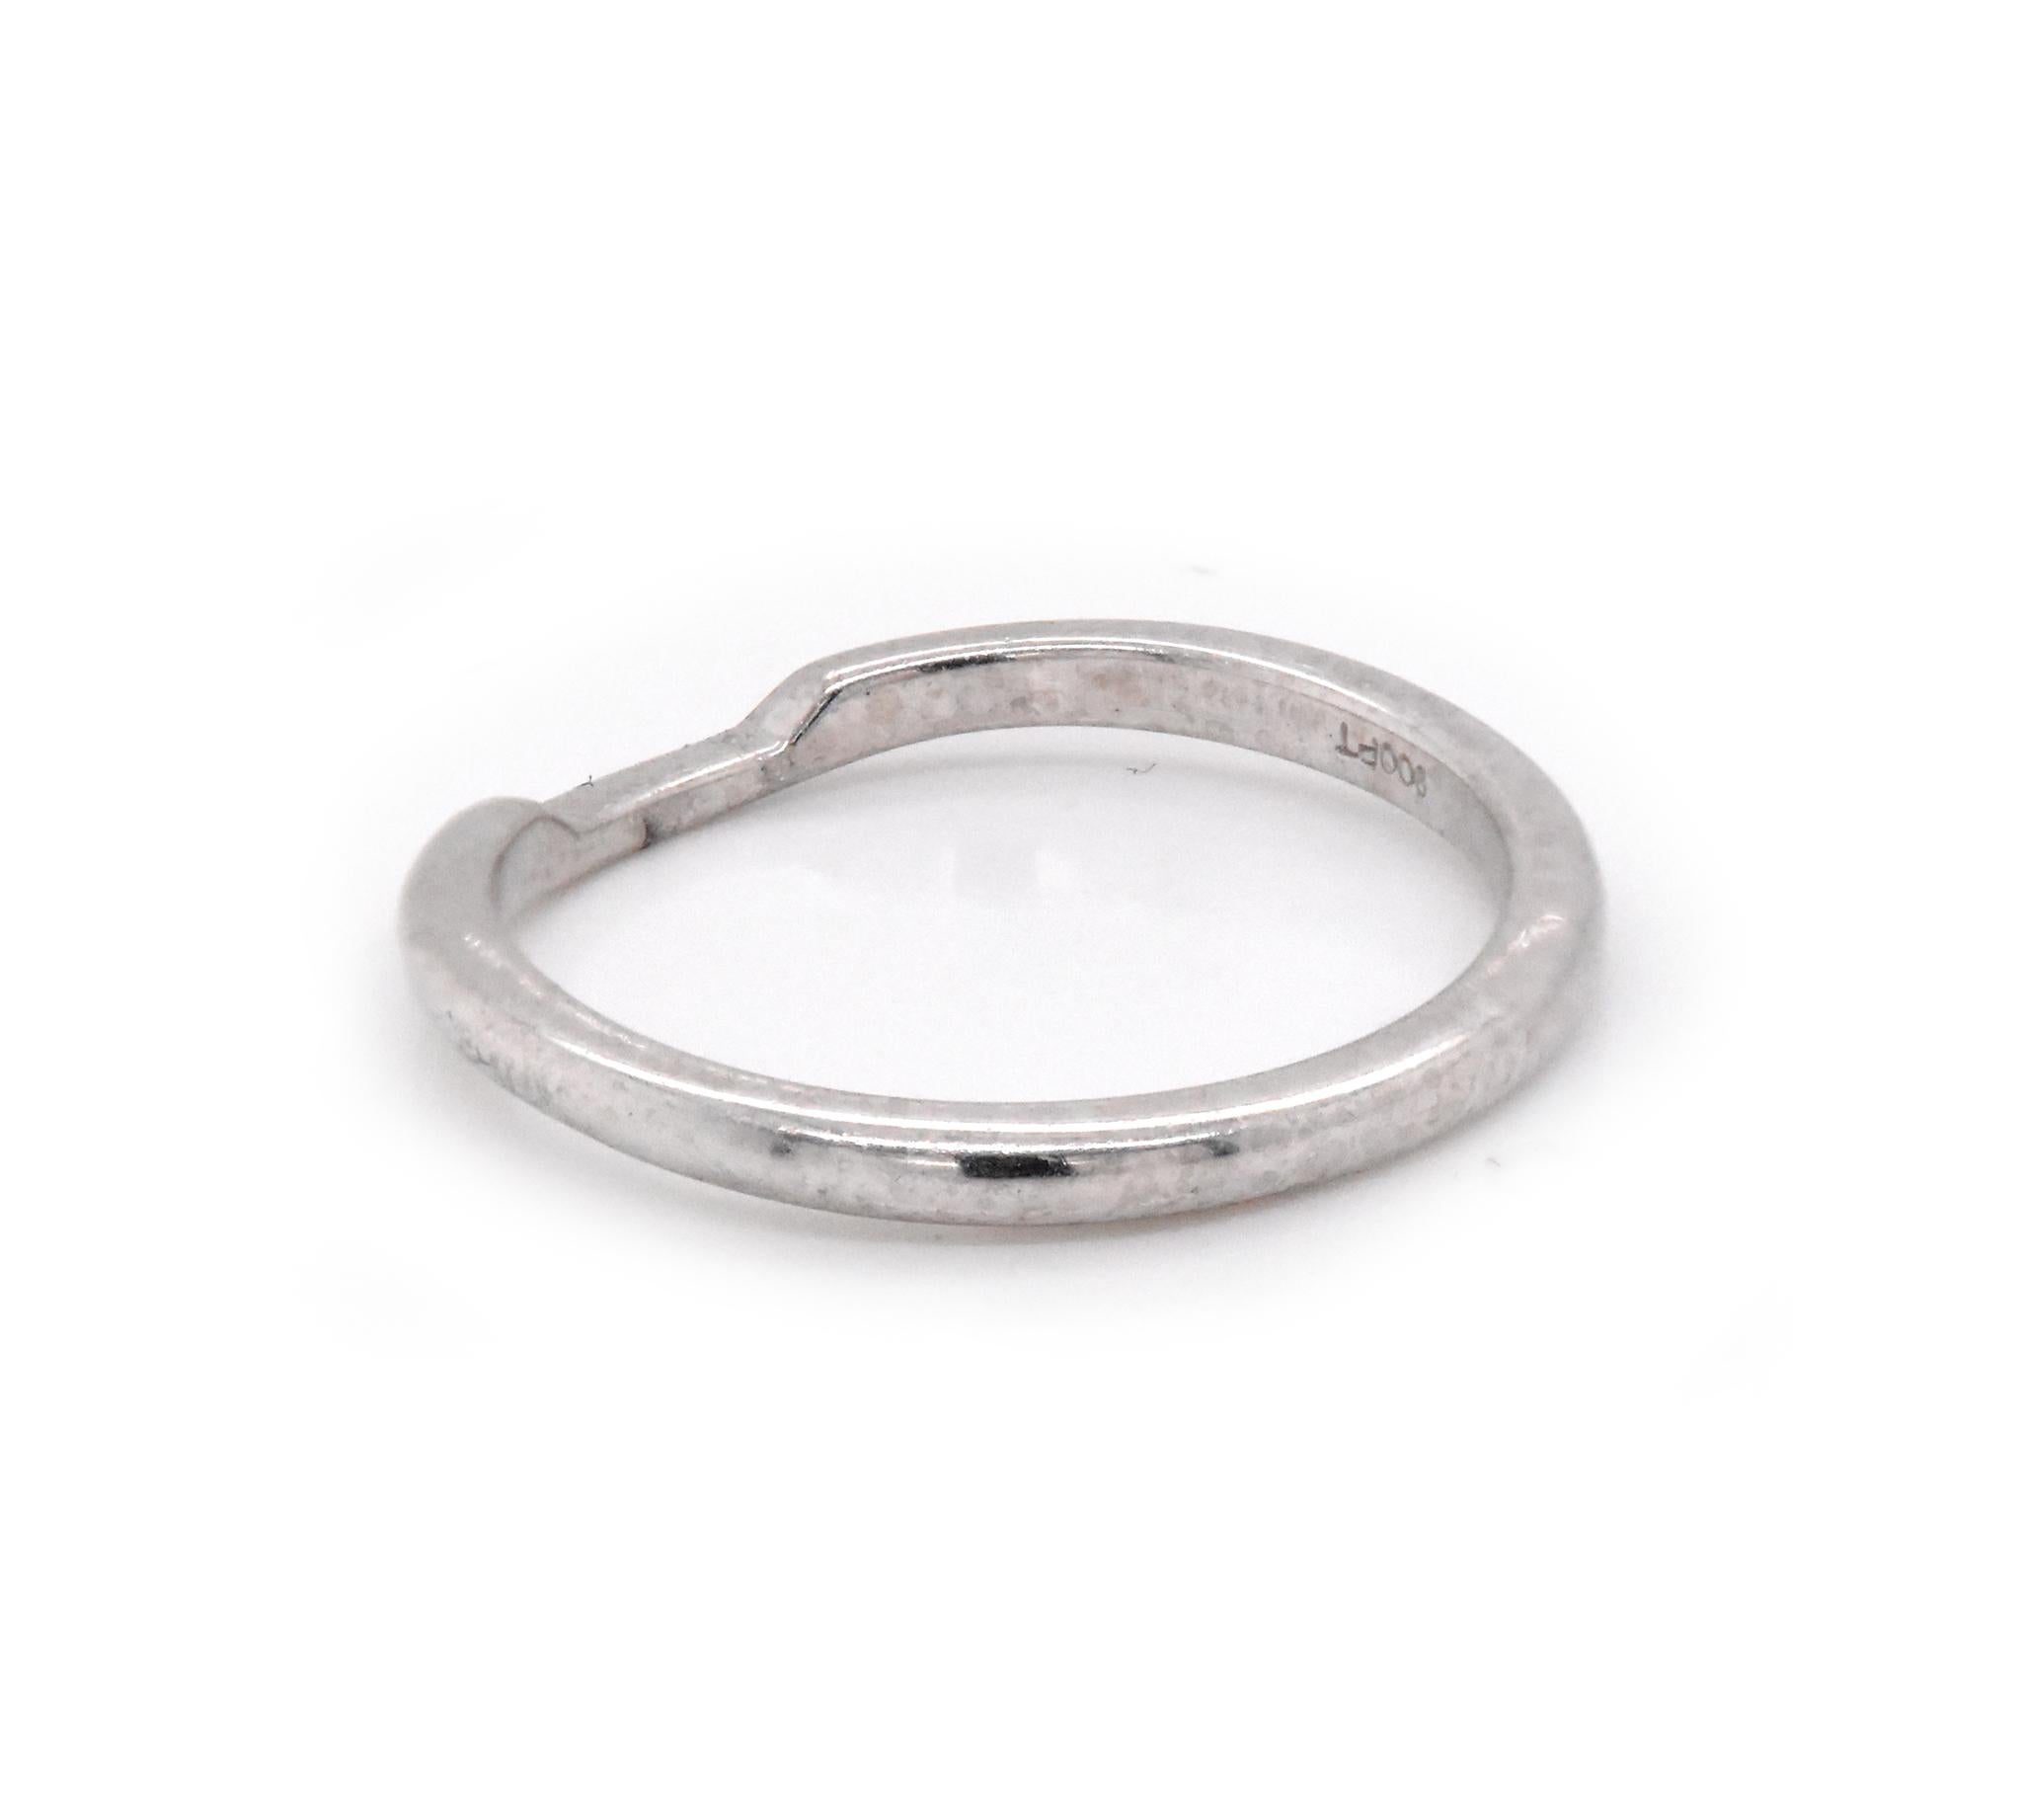 Designer: Victor Canera
Material: platinum
Dimensions: ring measures 1.9mm wide
Size: 6
Weight: 3.07 grams
